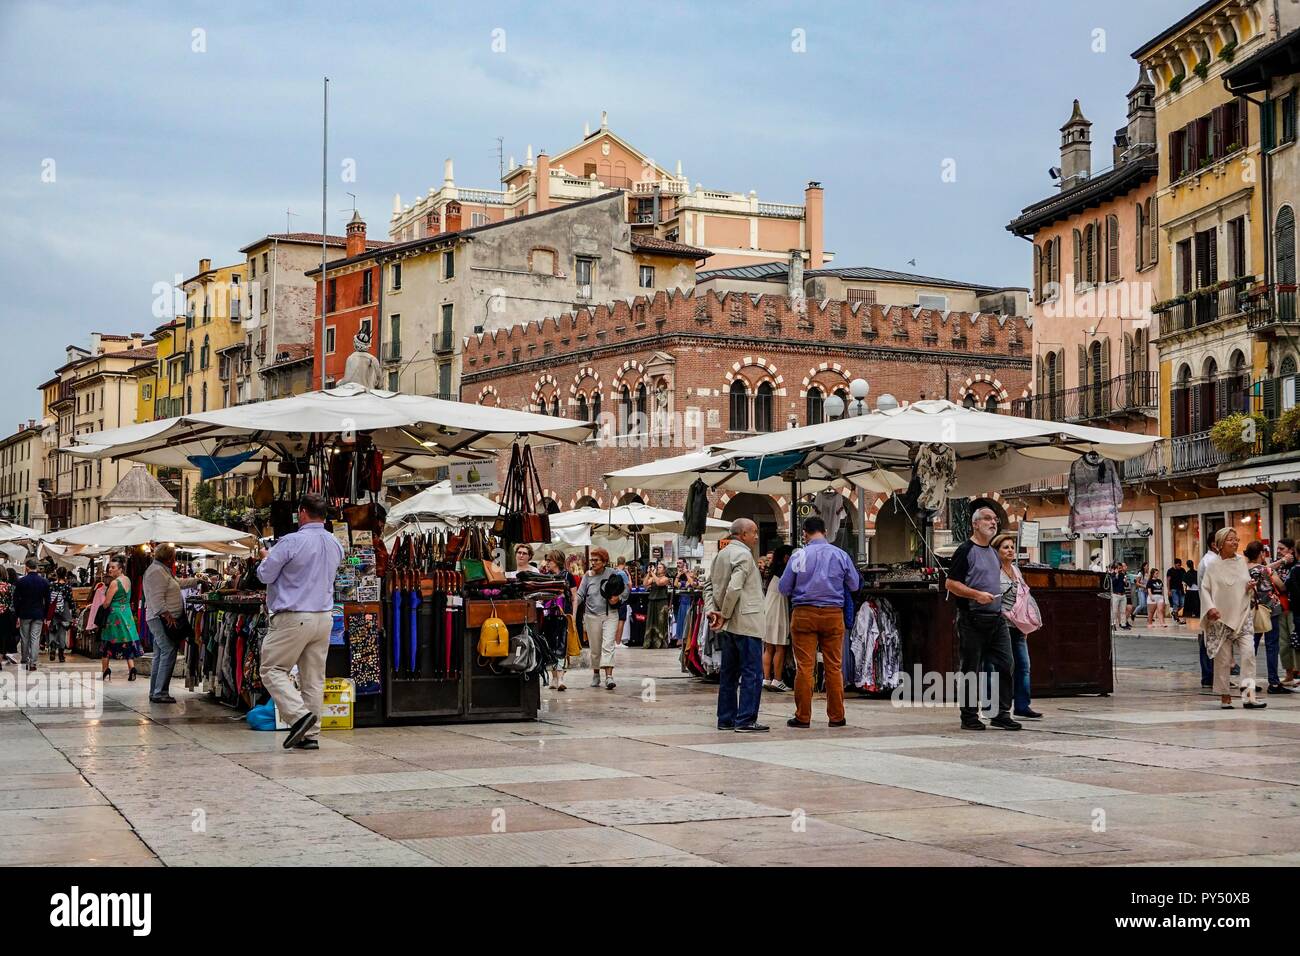 Verona, Italy. The Piazza delle Erbe is one of the tourist hotspots in Verona, filled with souvenir stalls of a vivid market Stock Photo